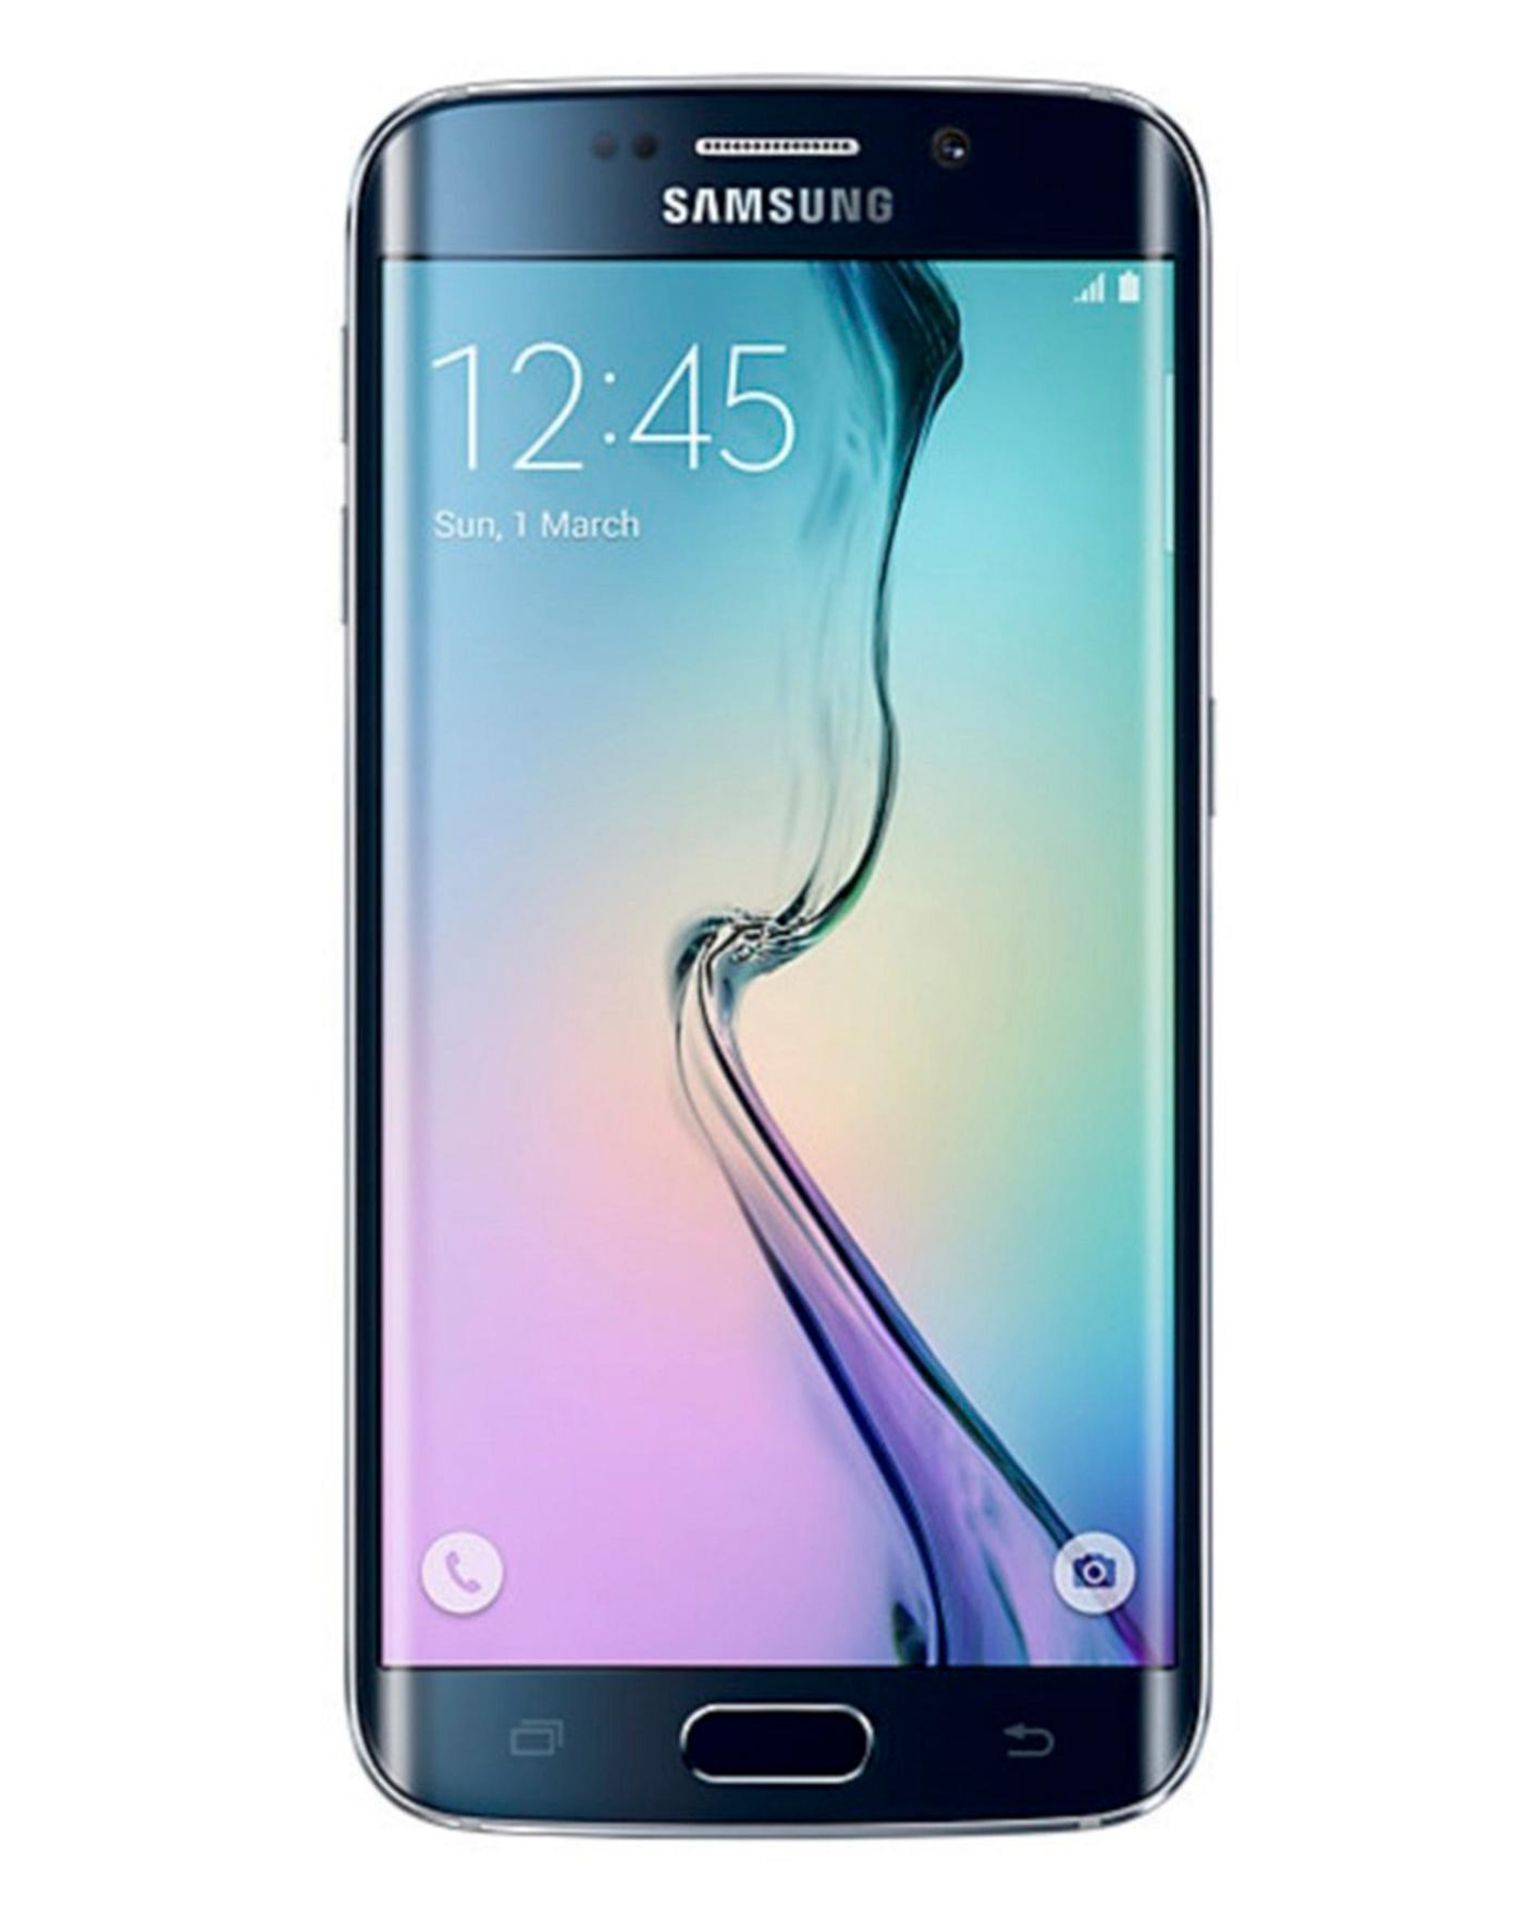 Grade U Samsung Galaxy S6 Edge Black 32gb Mobile Phone Boxed With Some Accessories May Include 1 Or